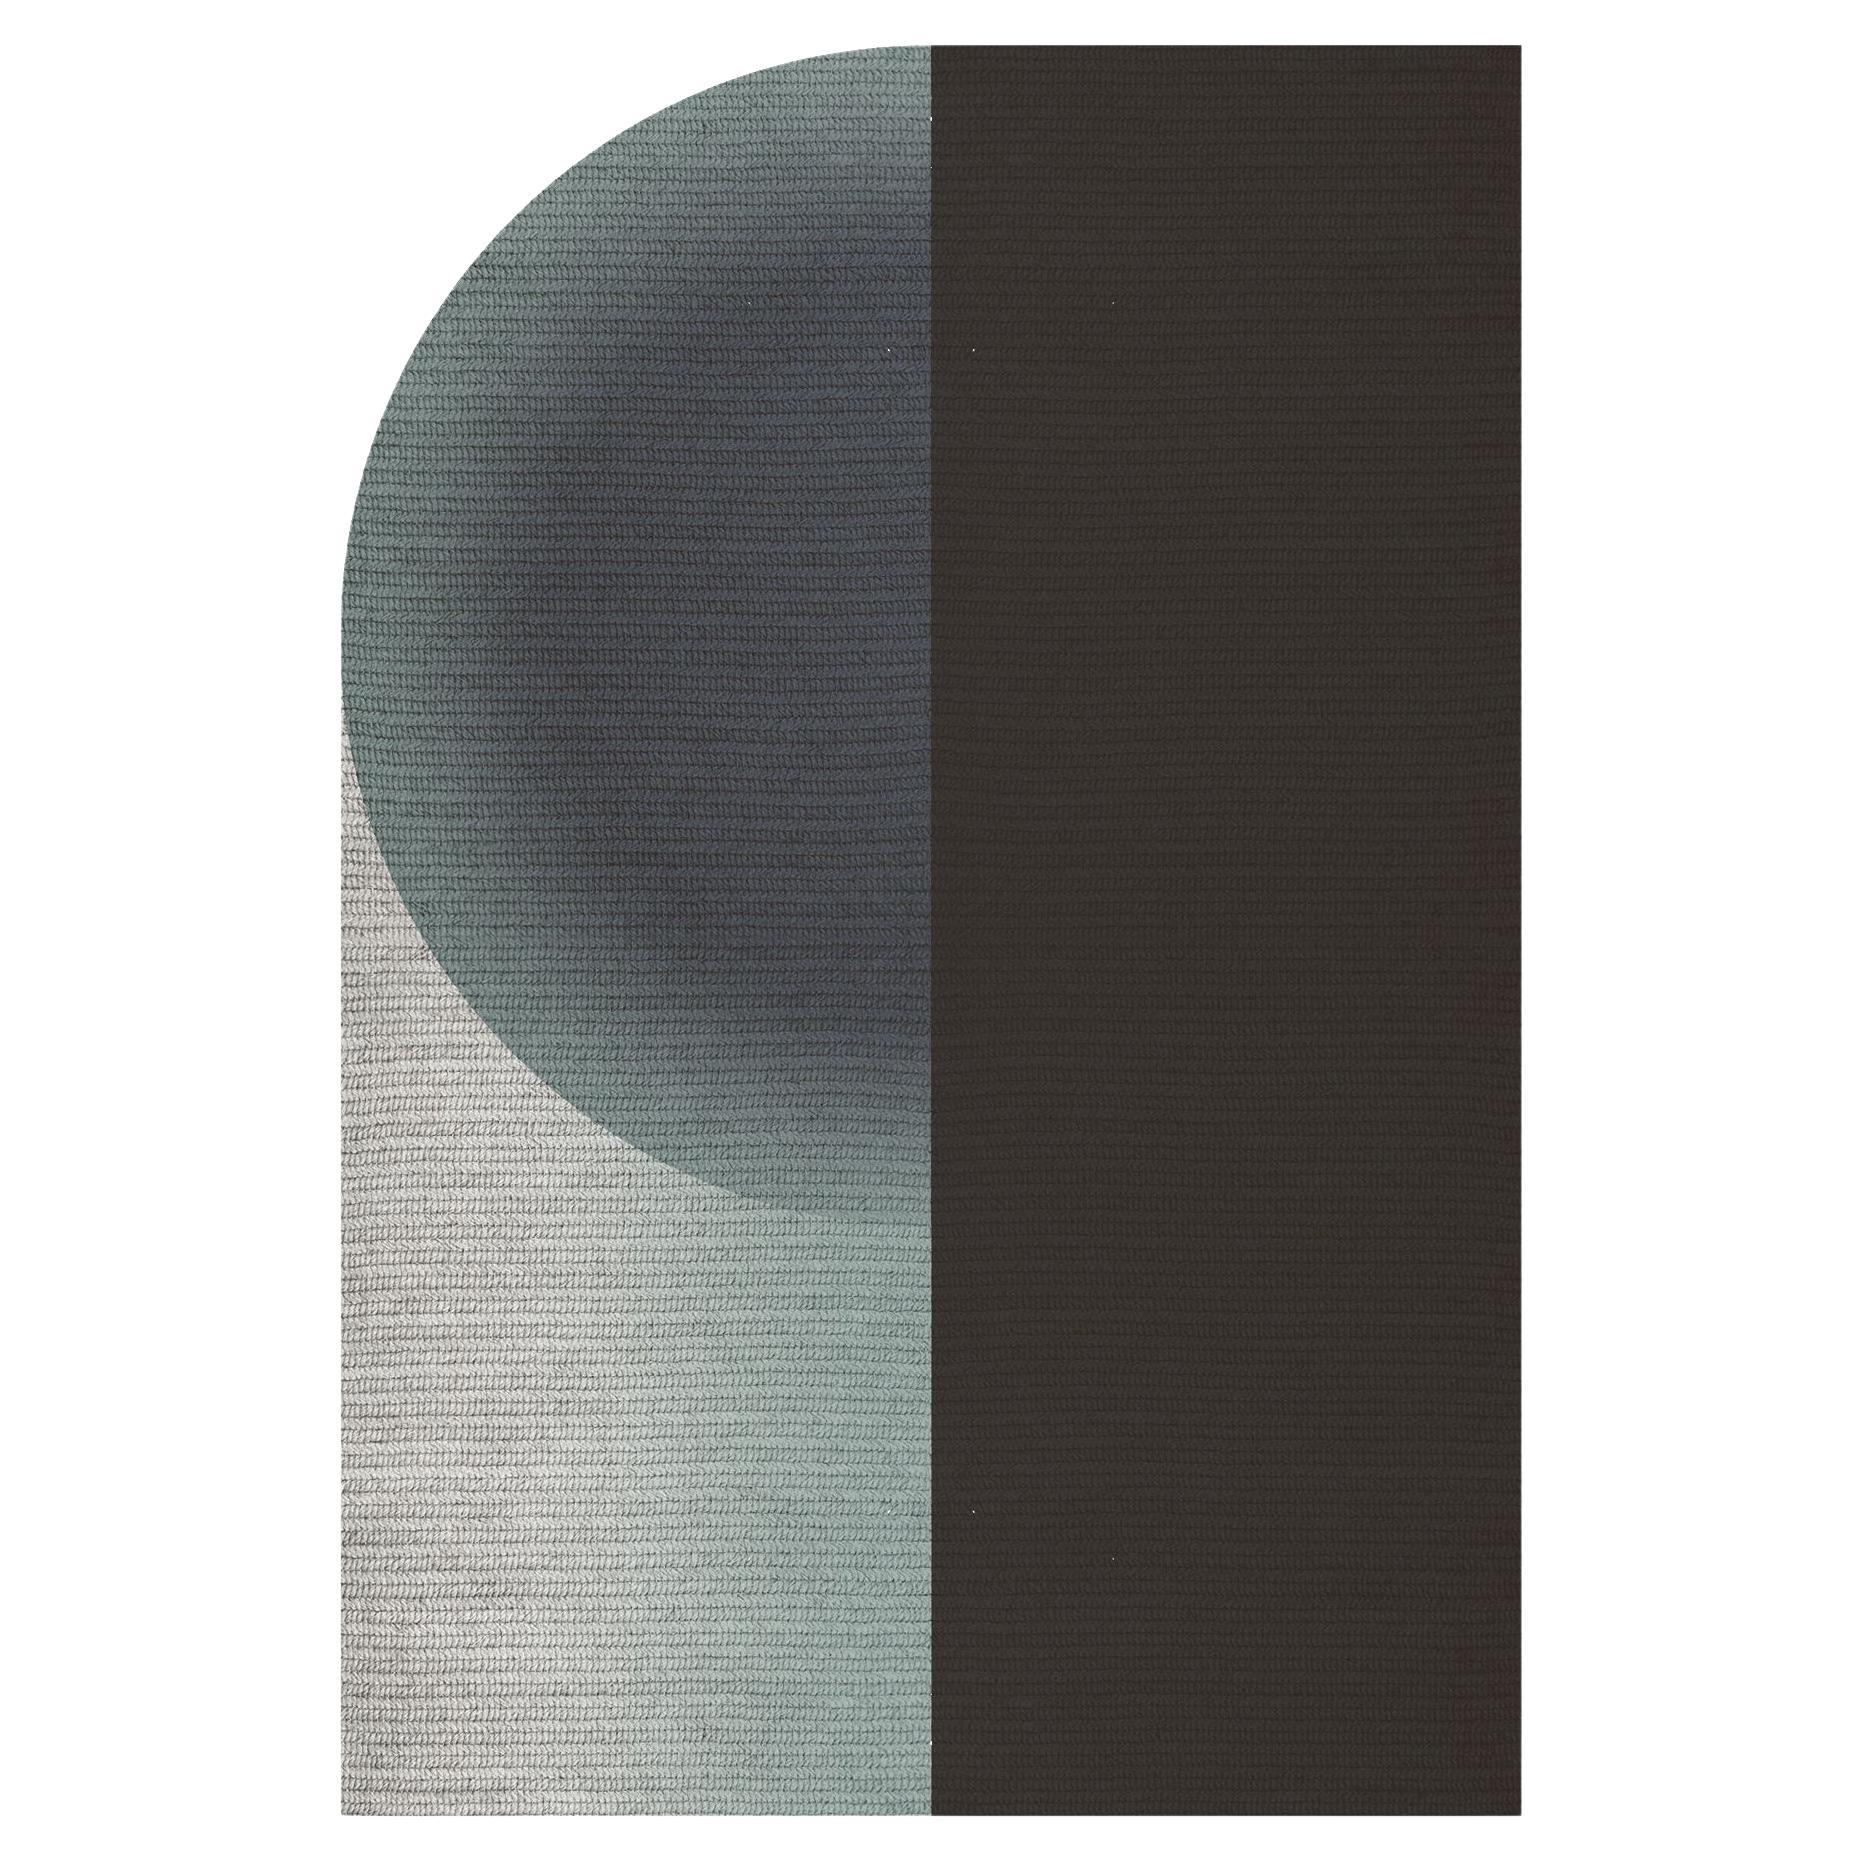 'Glow' Rug in Abaca, Colour 'Sterling' 160x240cm by Claire Vos for Musett Design For Sale